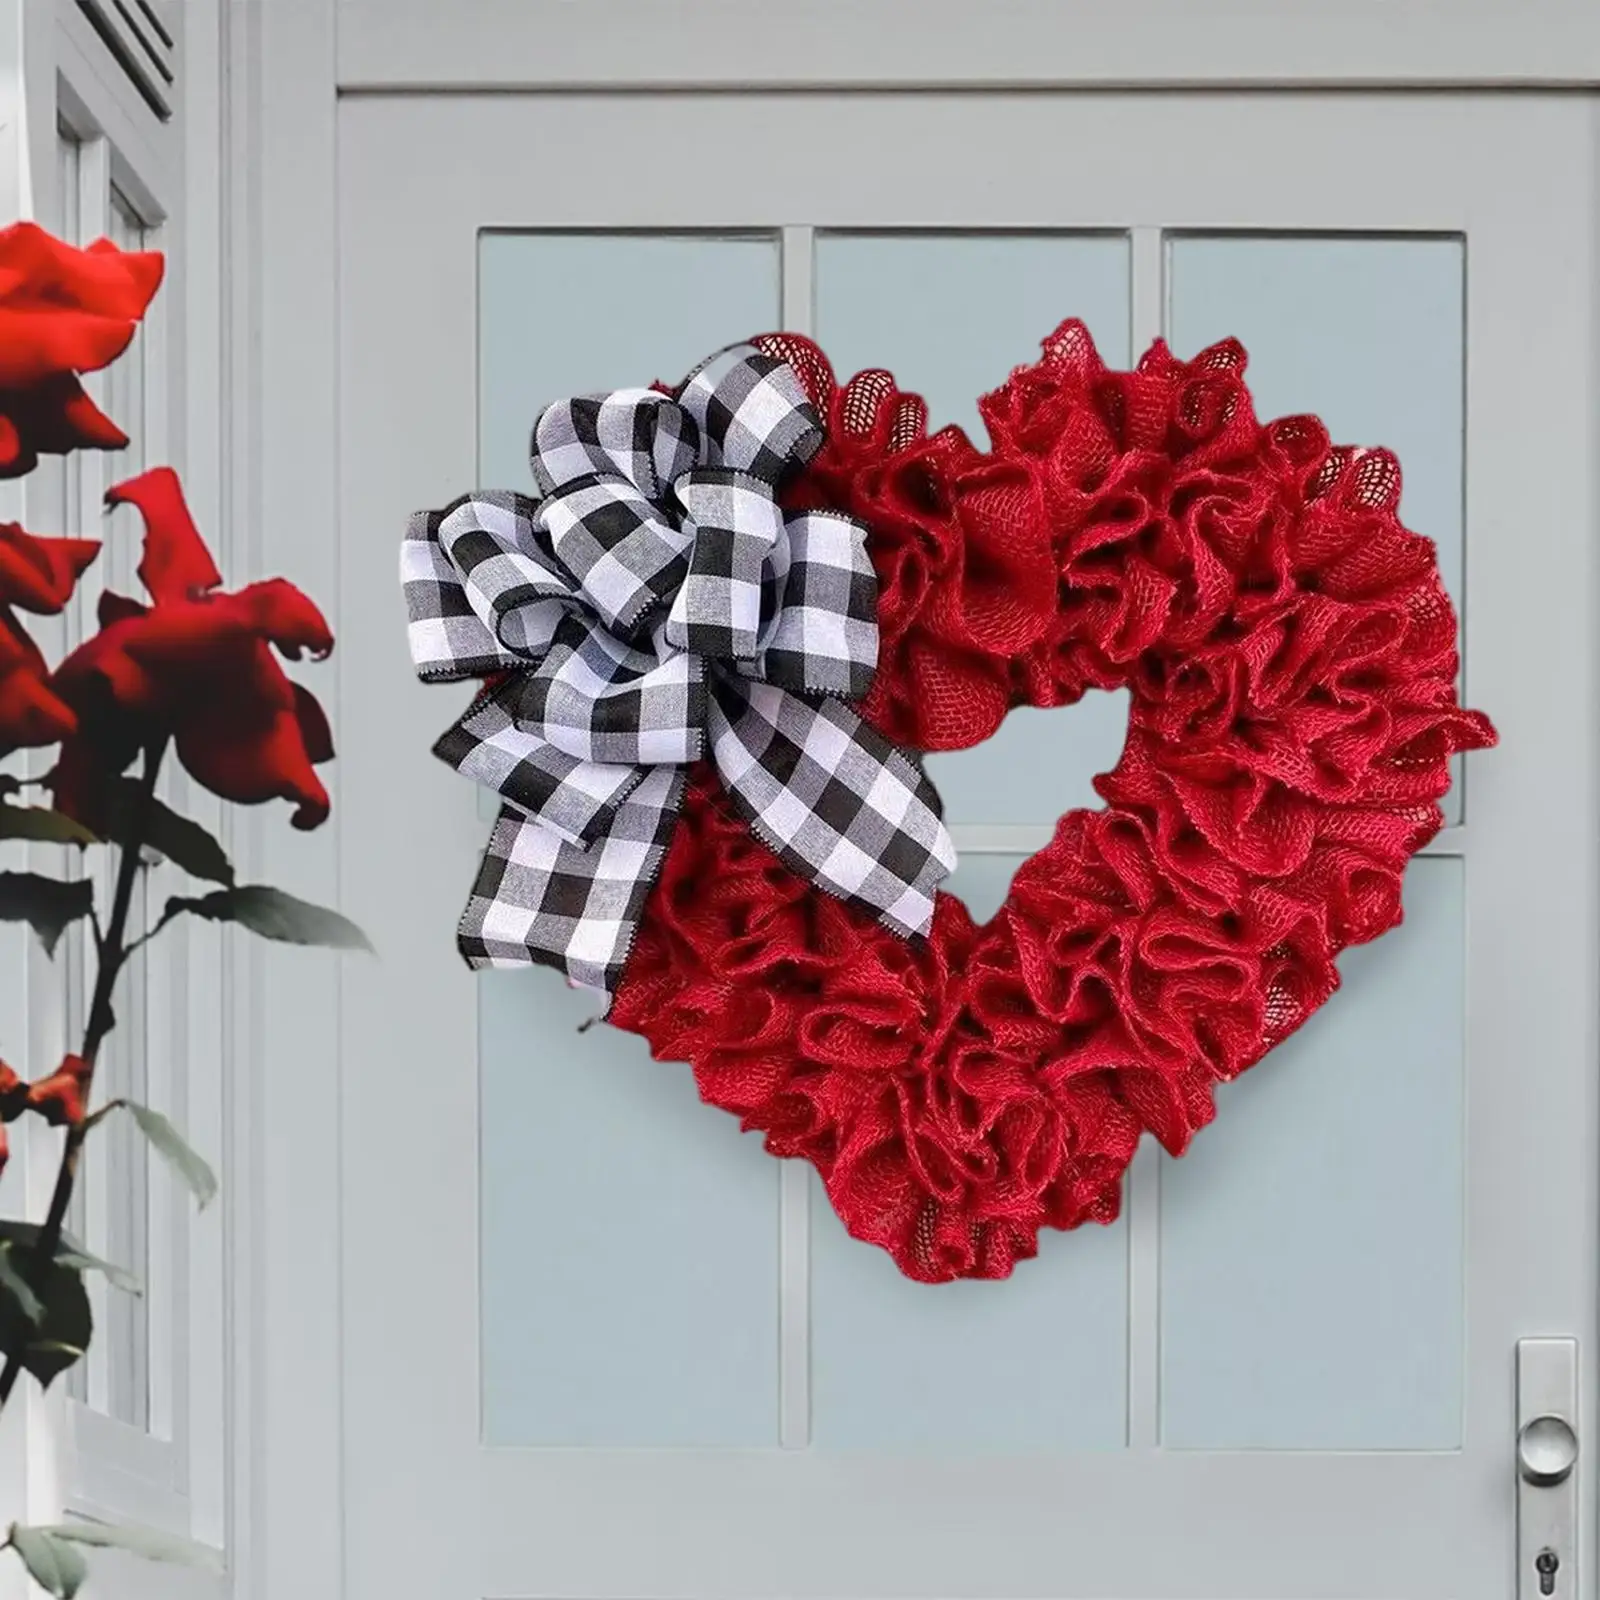 Red Heart Shaped Wreath 5.7in Plaid Bowknot Front Door Artificial Garland for Home Farmhouse Decoration